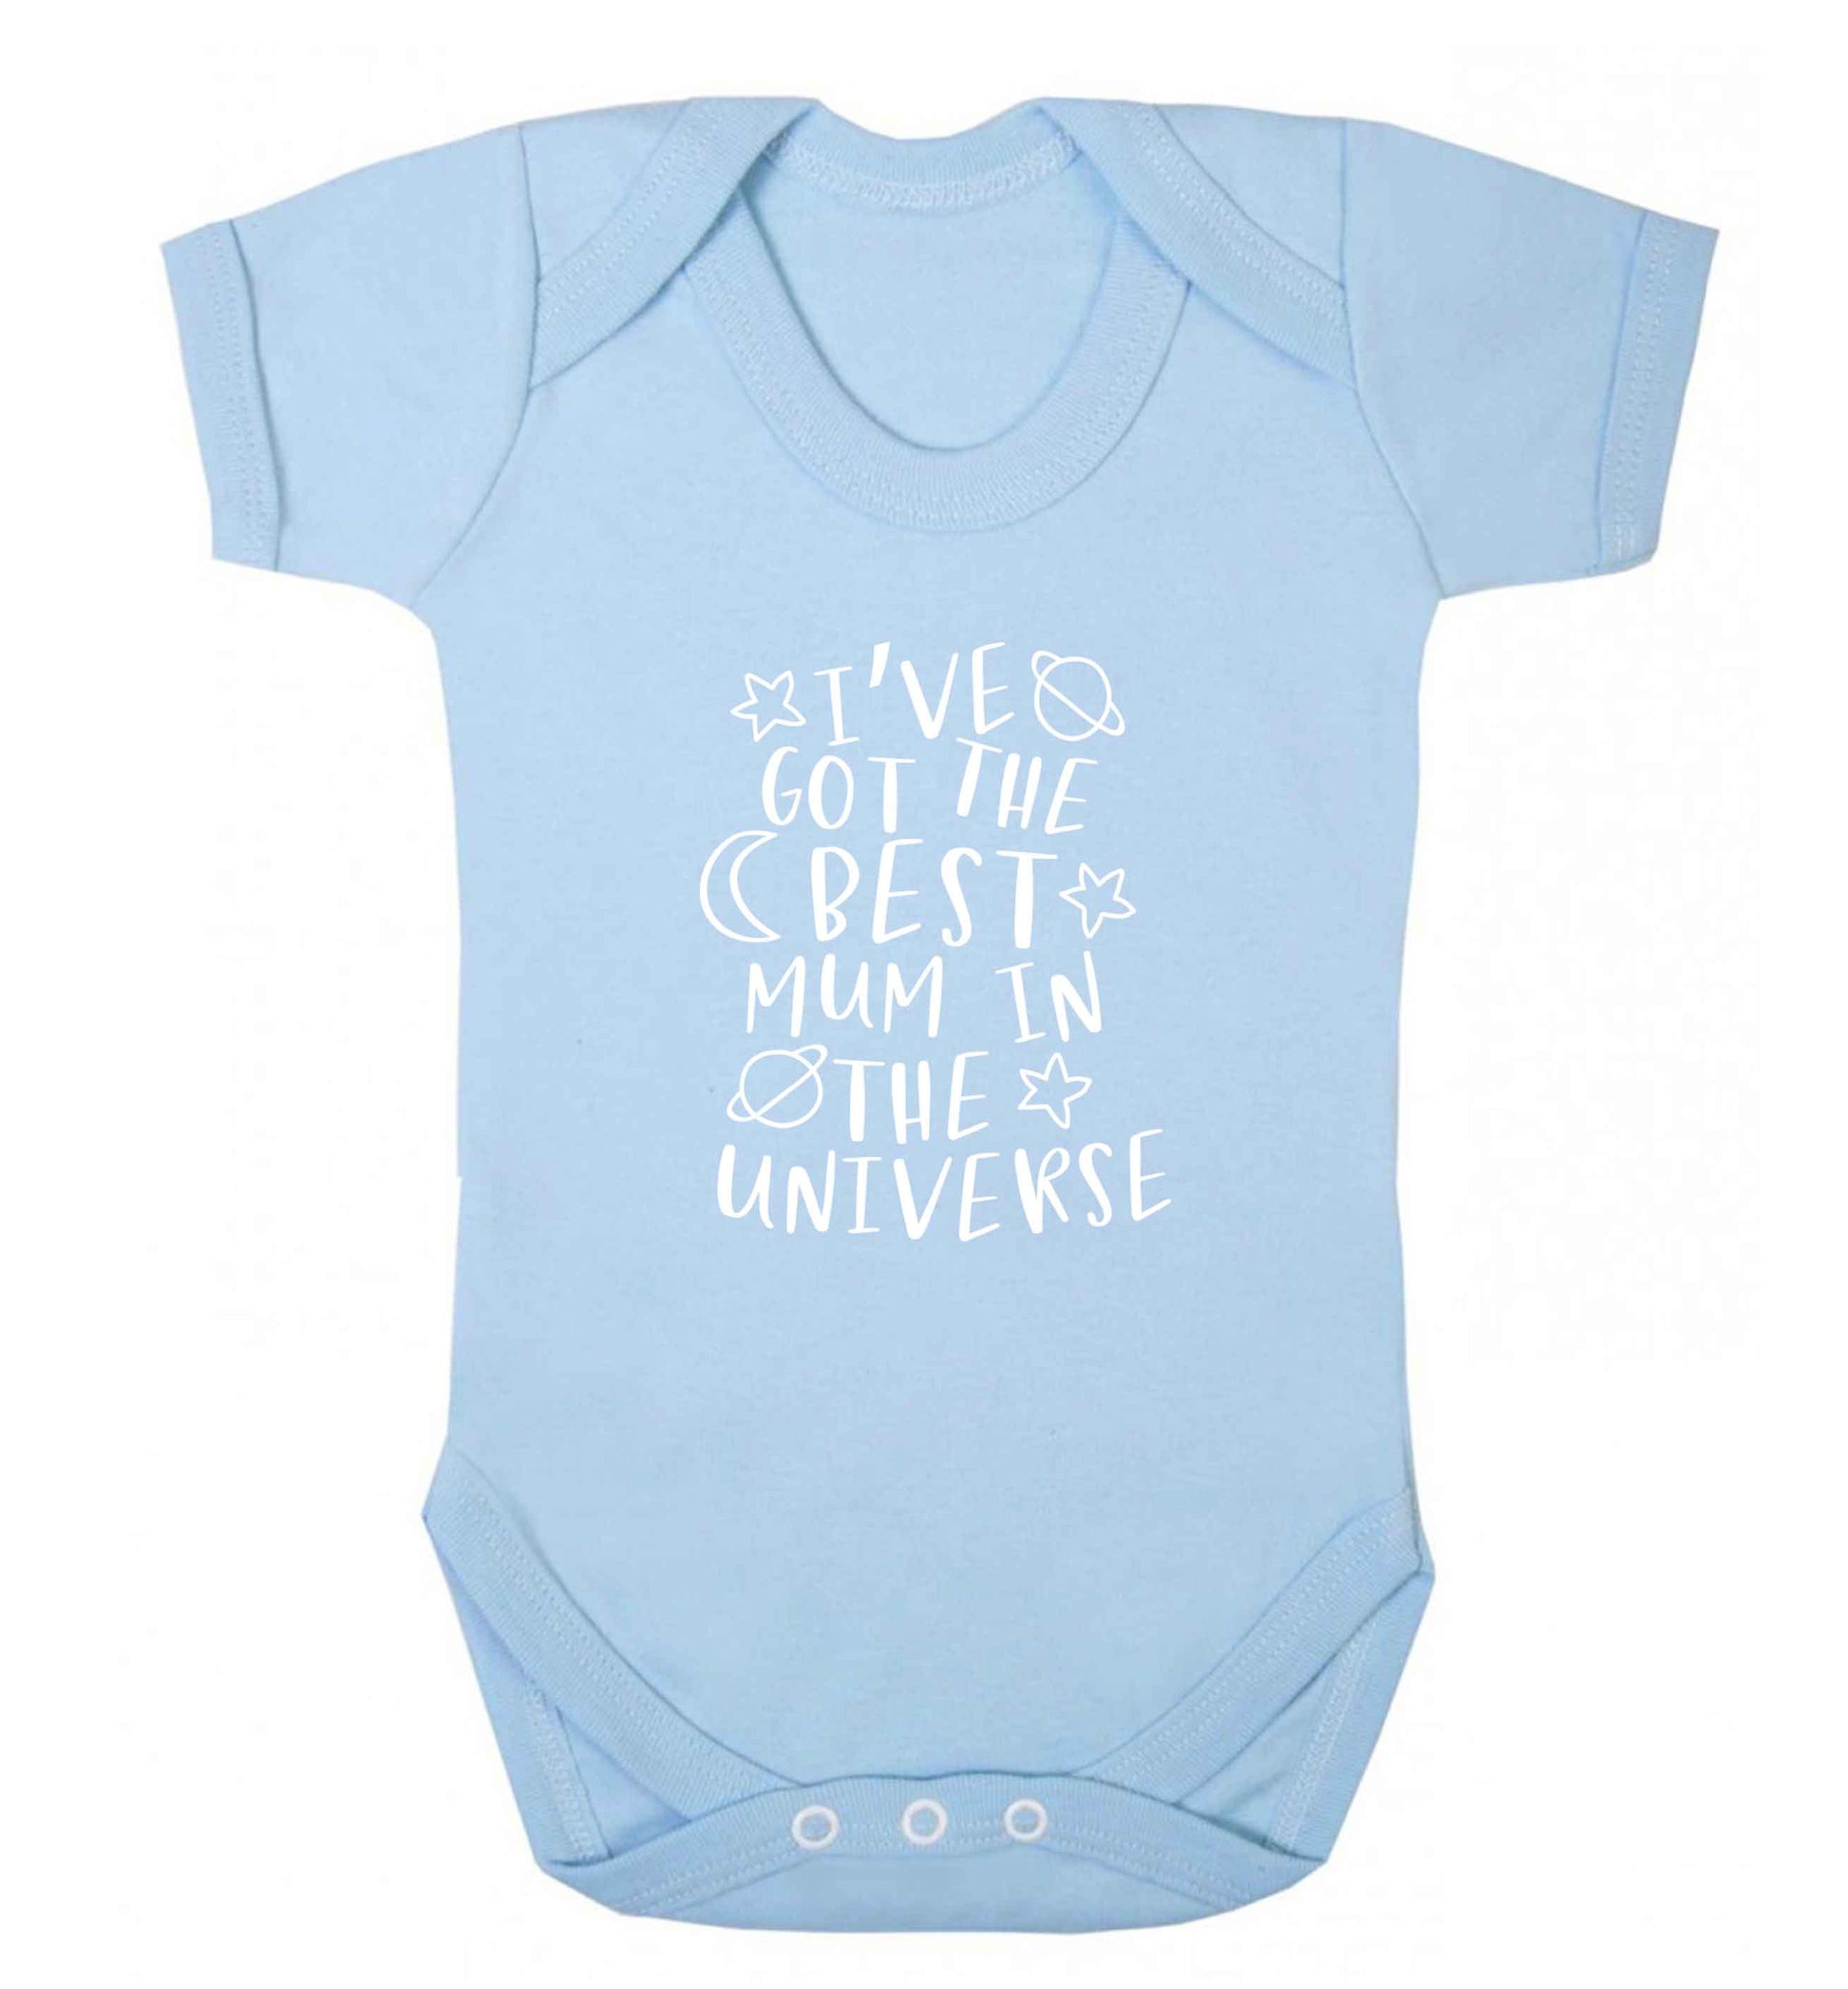 I've got the best mum in the universe baby vest pale blue 18-24 months